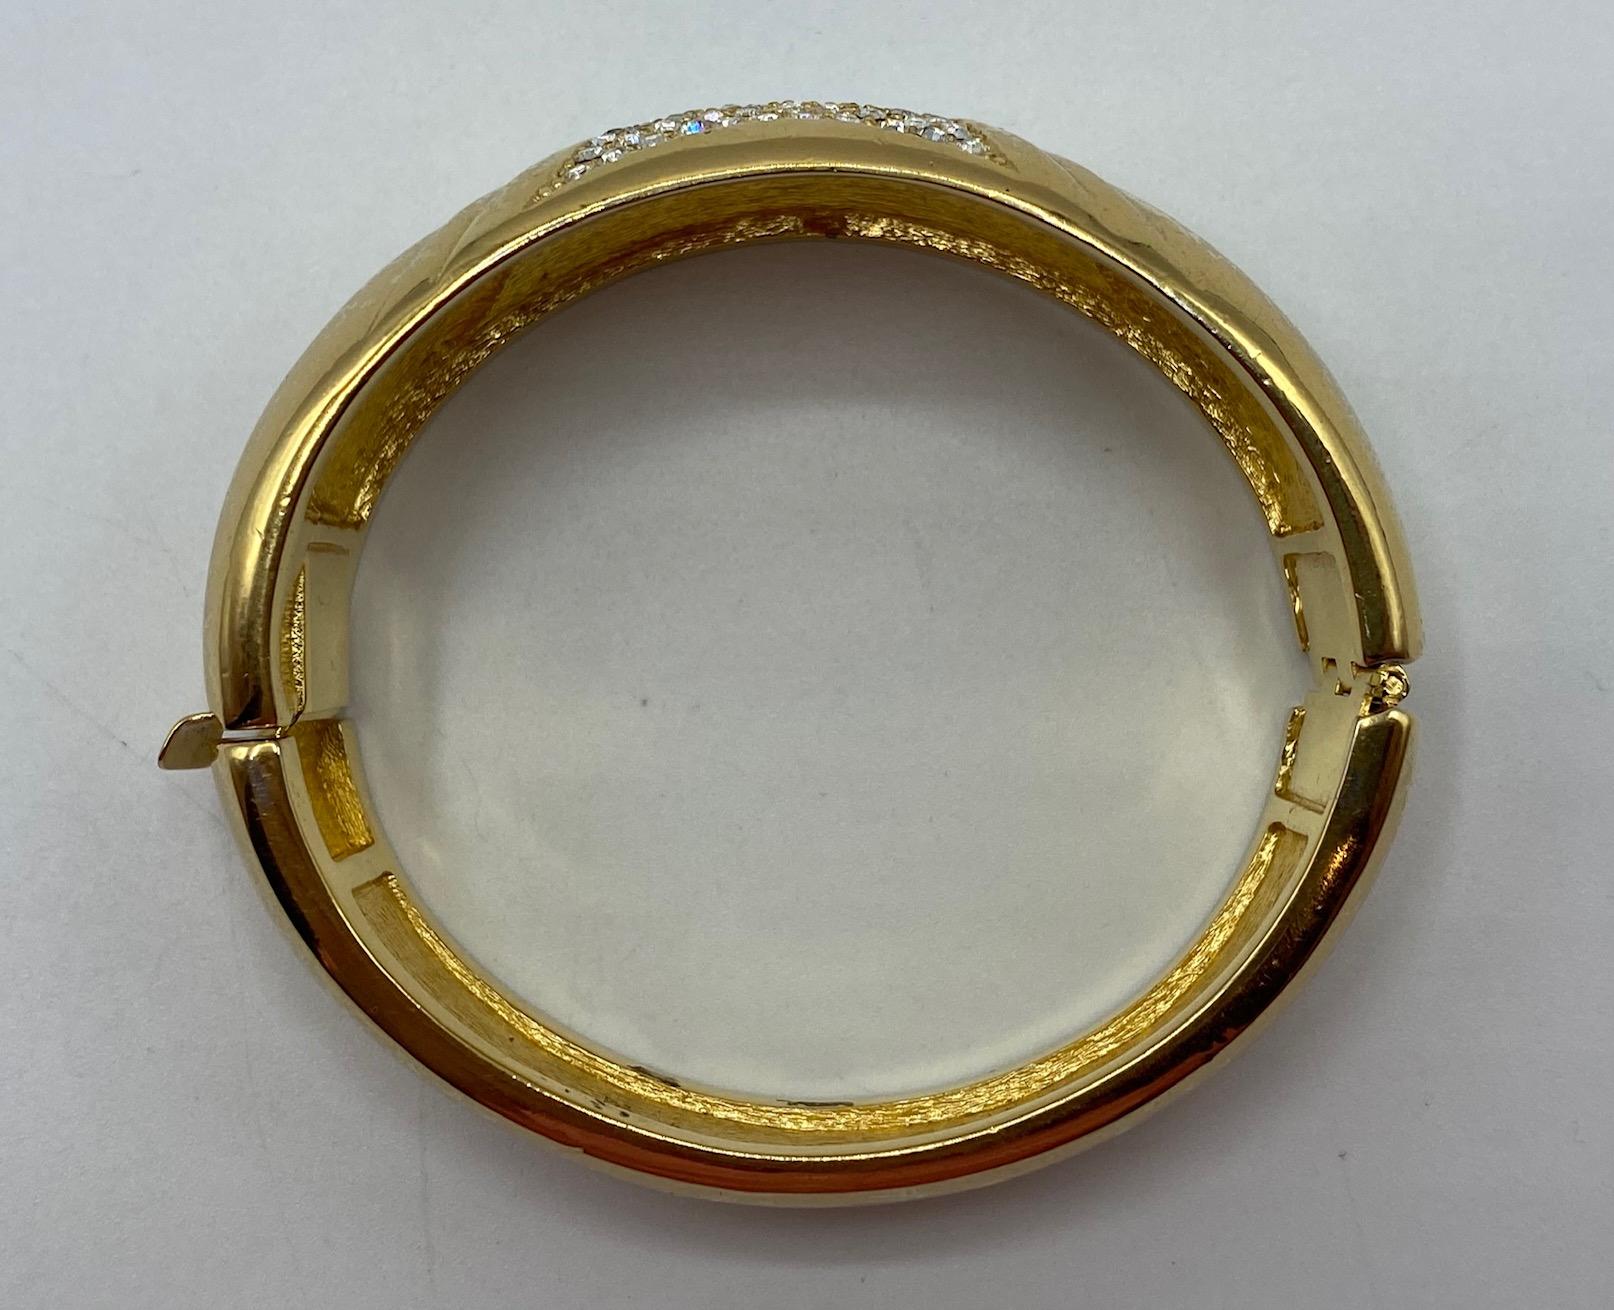 Christian Dior 1980s Gold with Rhinestone Art Deco Style Bangle Bracelet In Good Condition For Sale In New York, NY